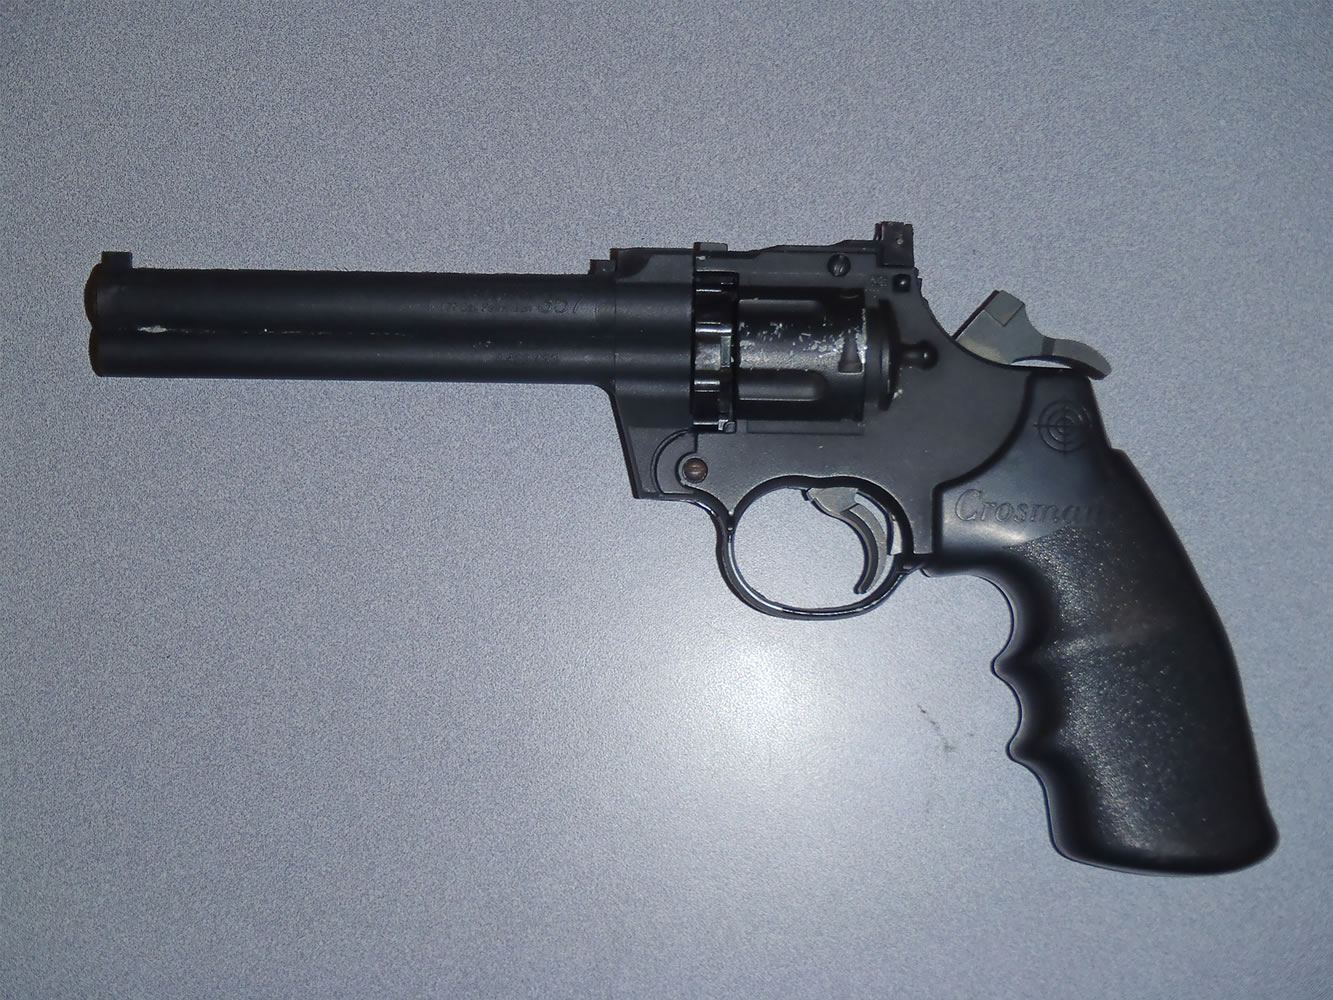 Camas police say they seized this plastic pellet gun that resembles a .357 revolver in this photo provided Friday.